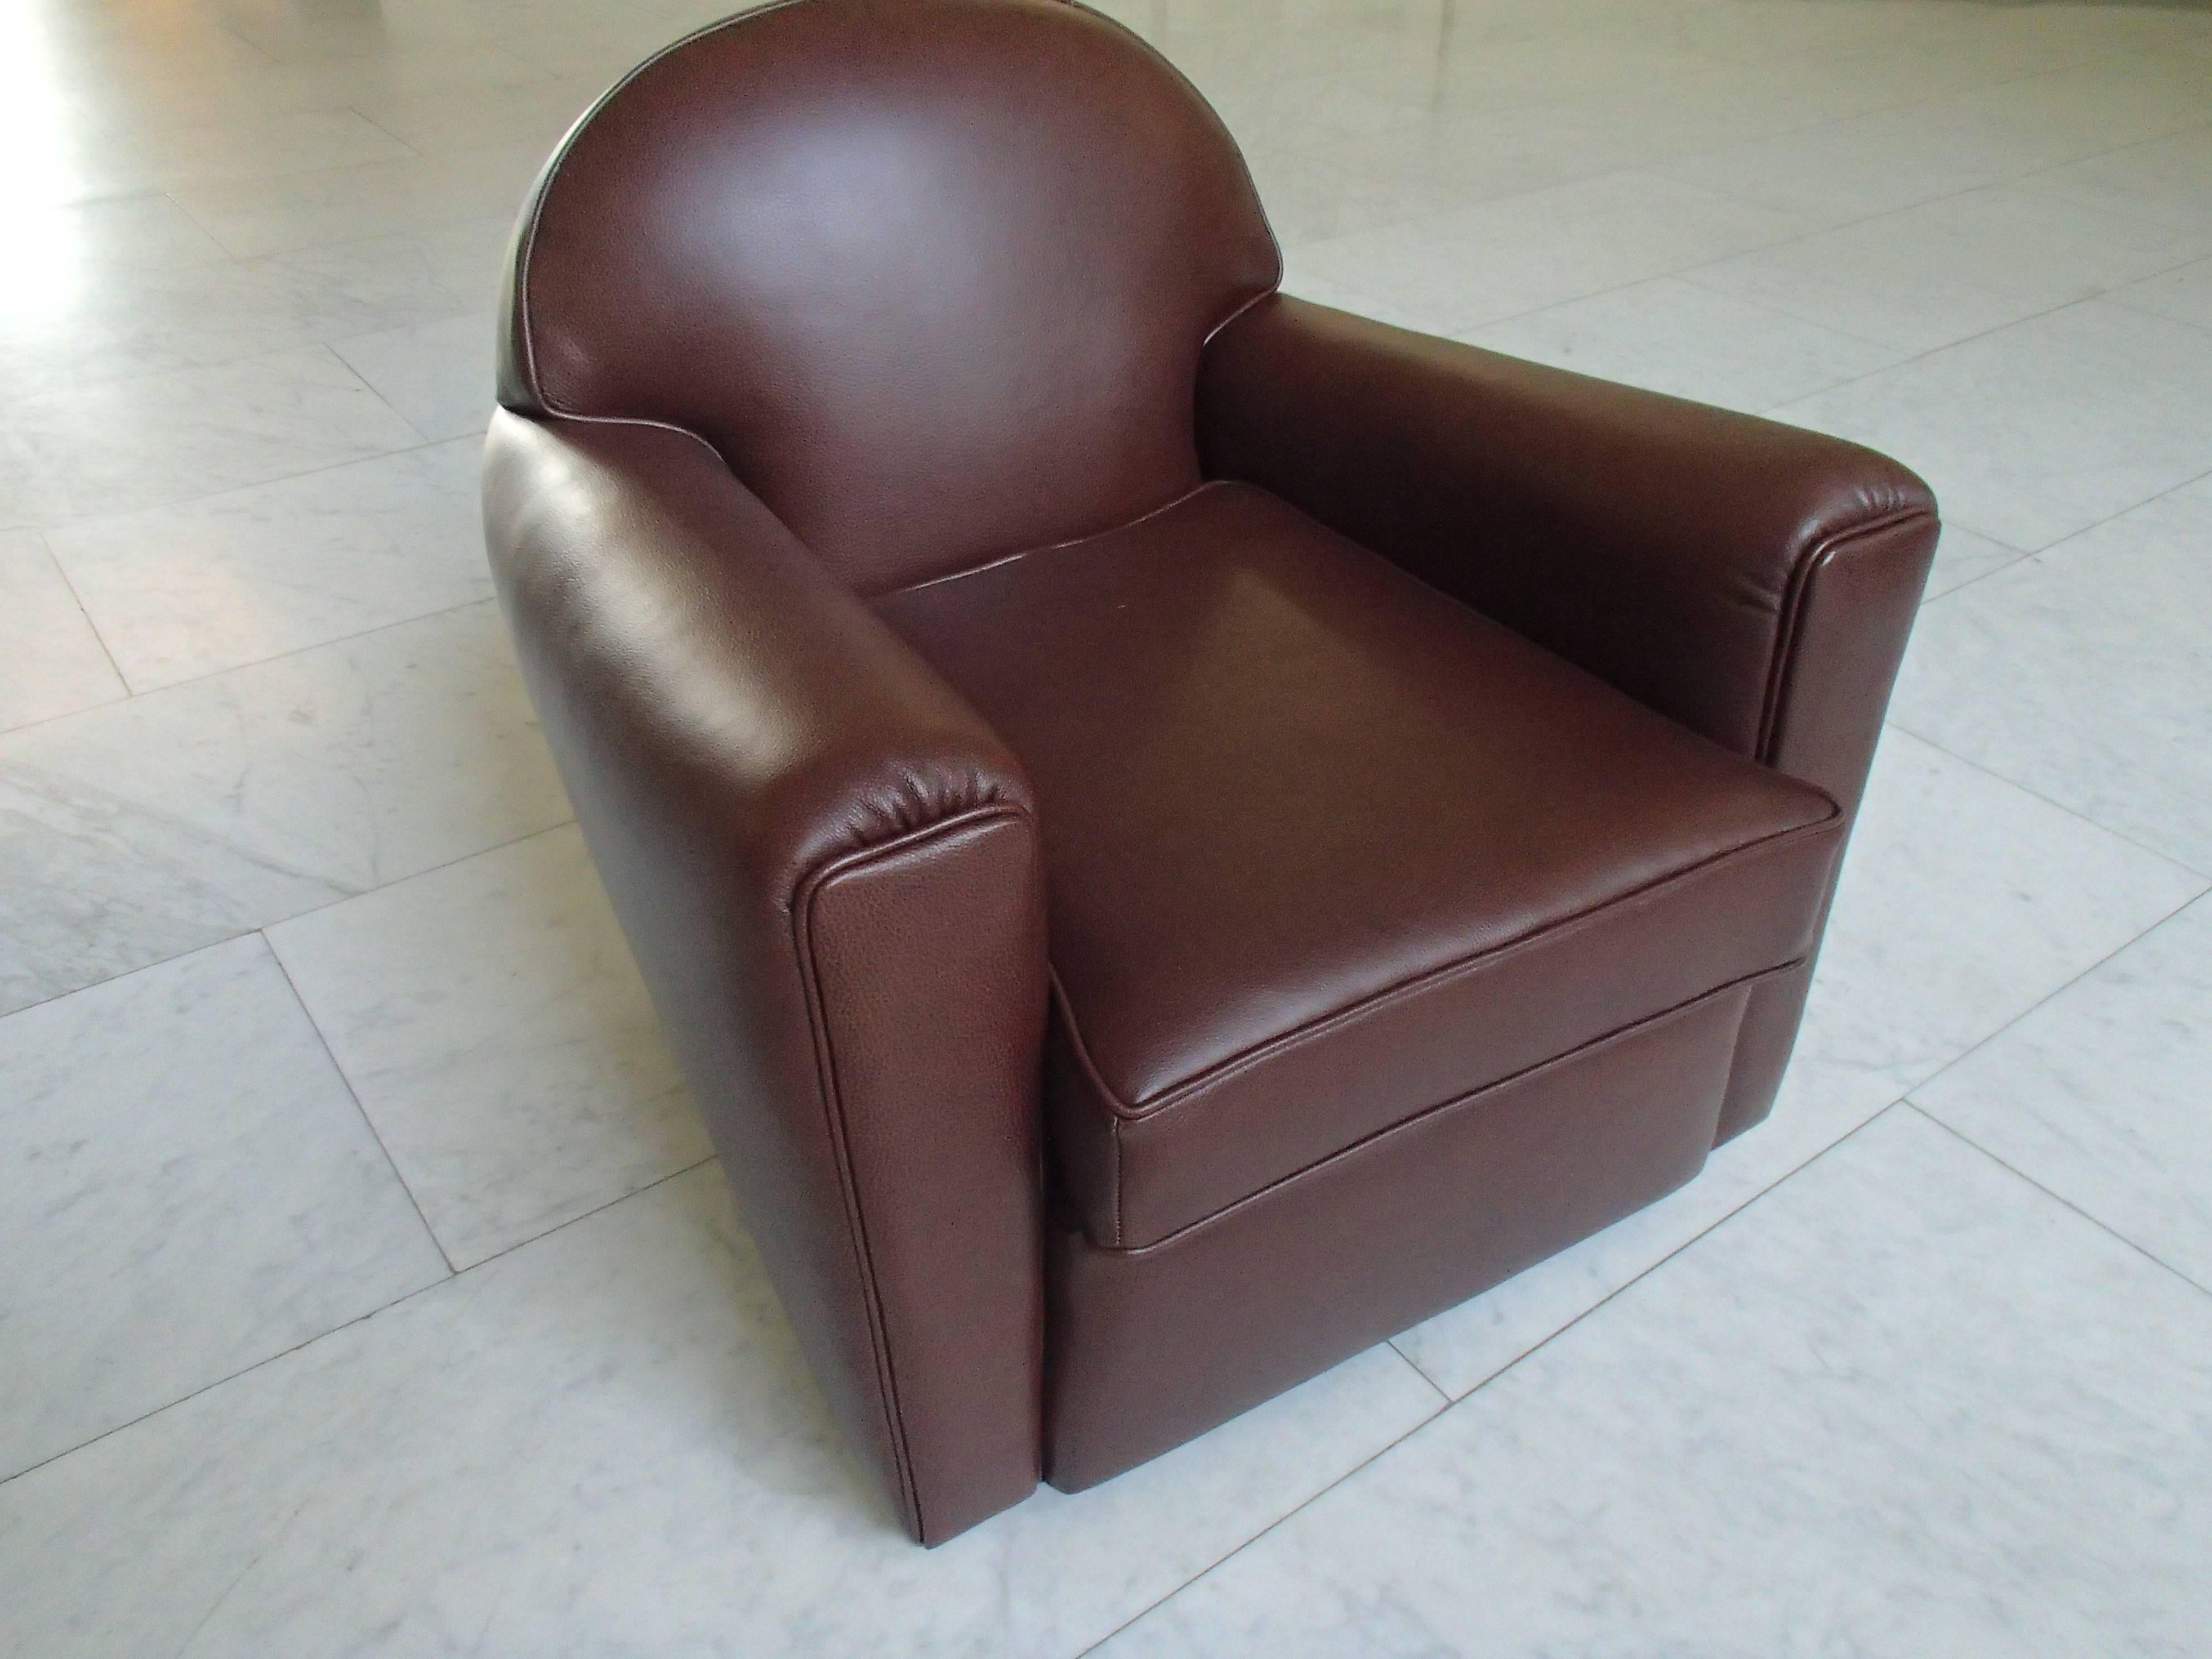 Art Deco club chair completely restored and recovered with brown leather.